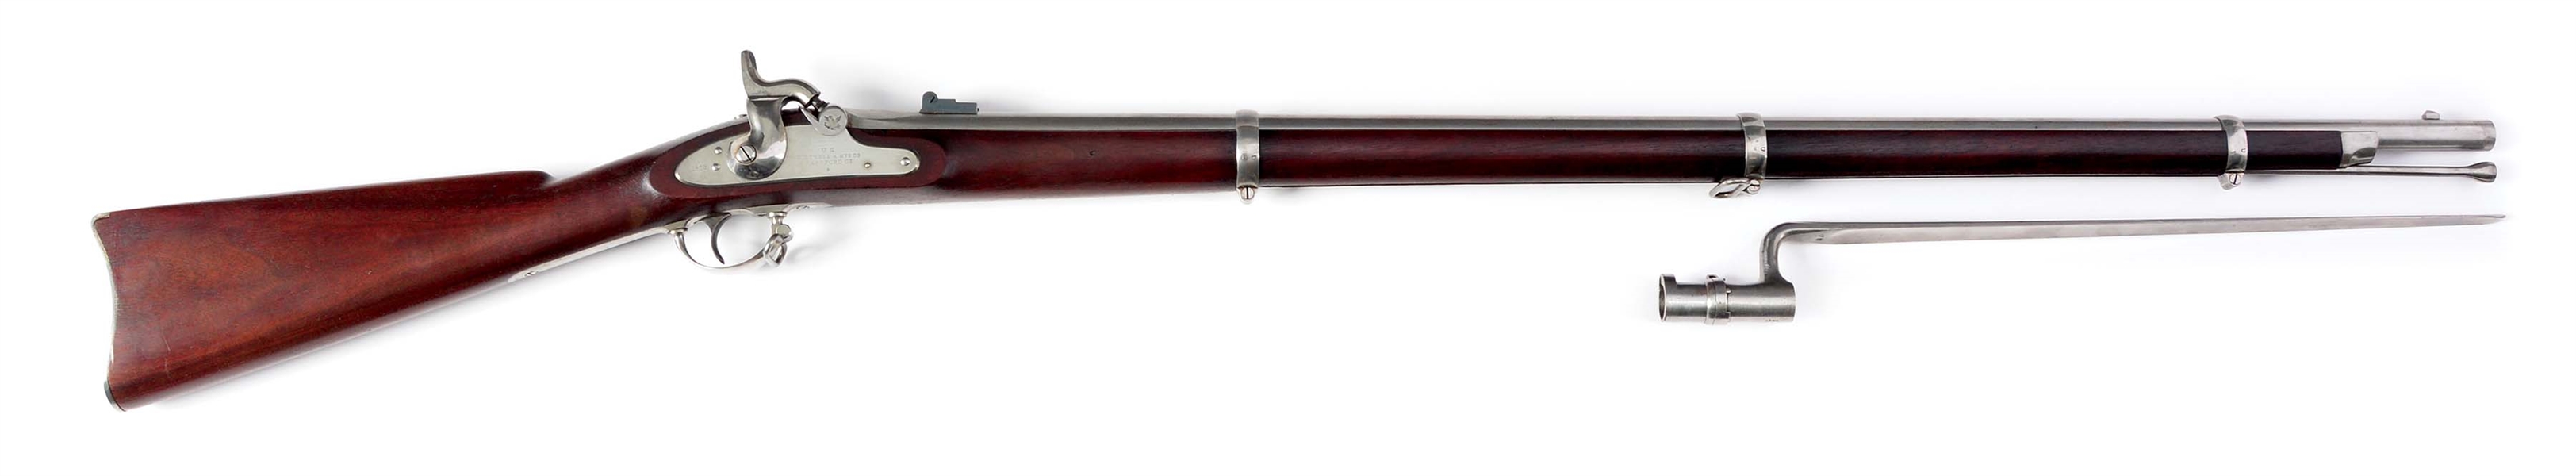 (A) FINE COLT MODEL 1861 SPECIAL CONTRACT PERCUSSION RIFLE MUSKET.